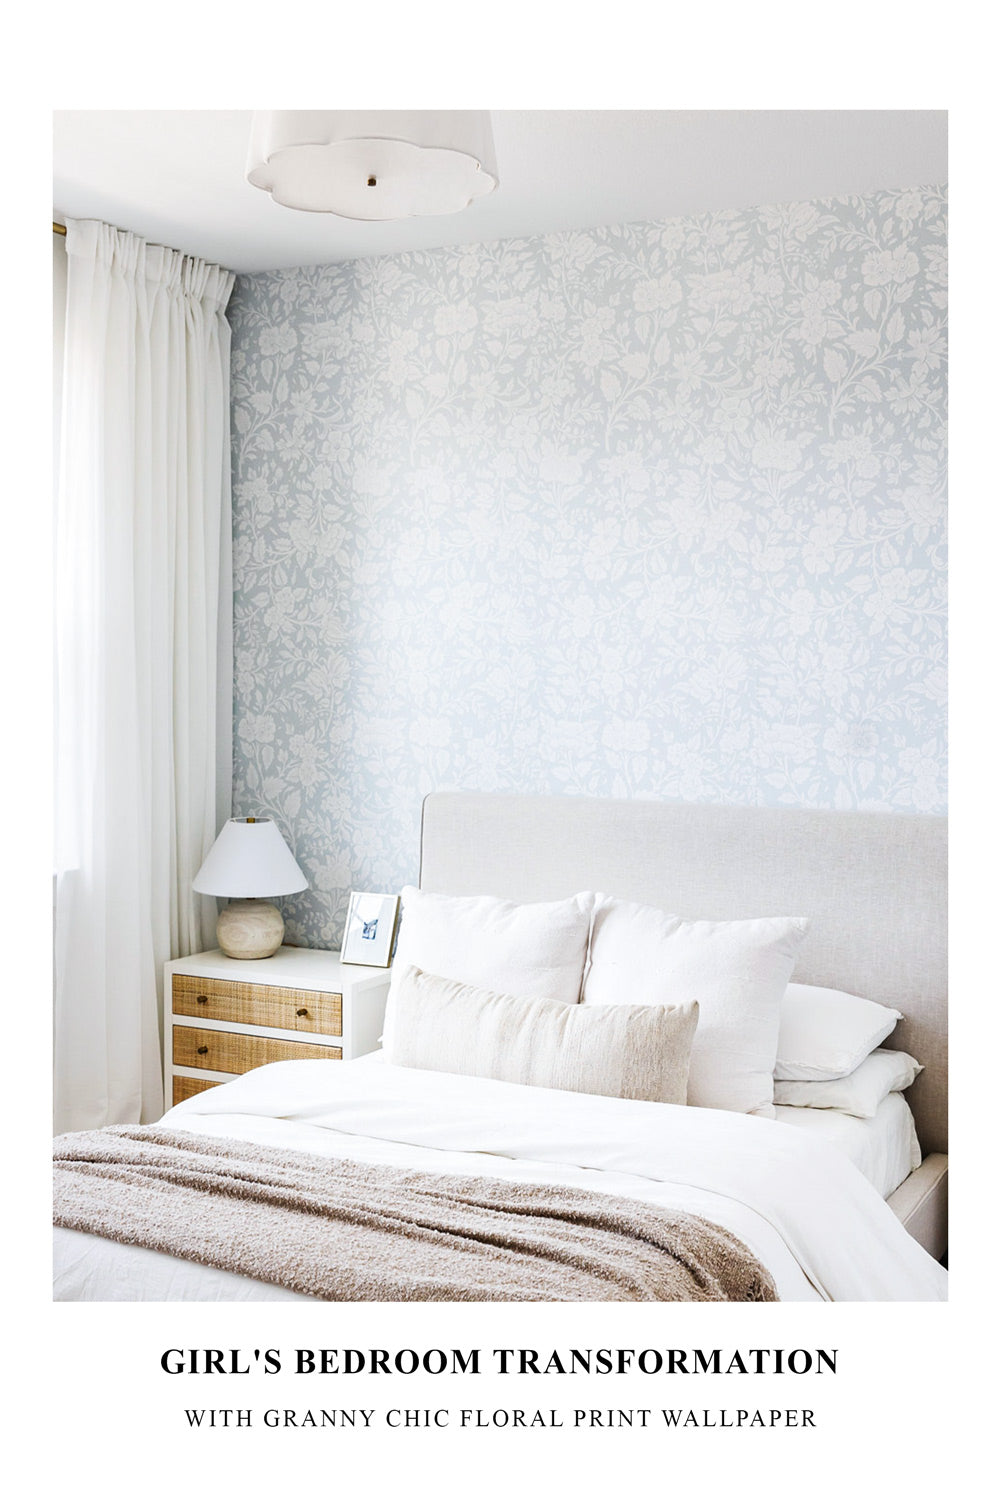 Girl's Bedroom Transformation With Granny Chic Floral Print Wallpaper